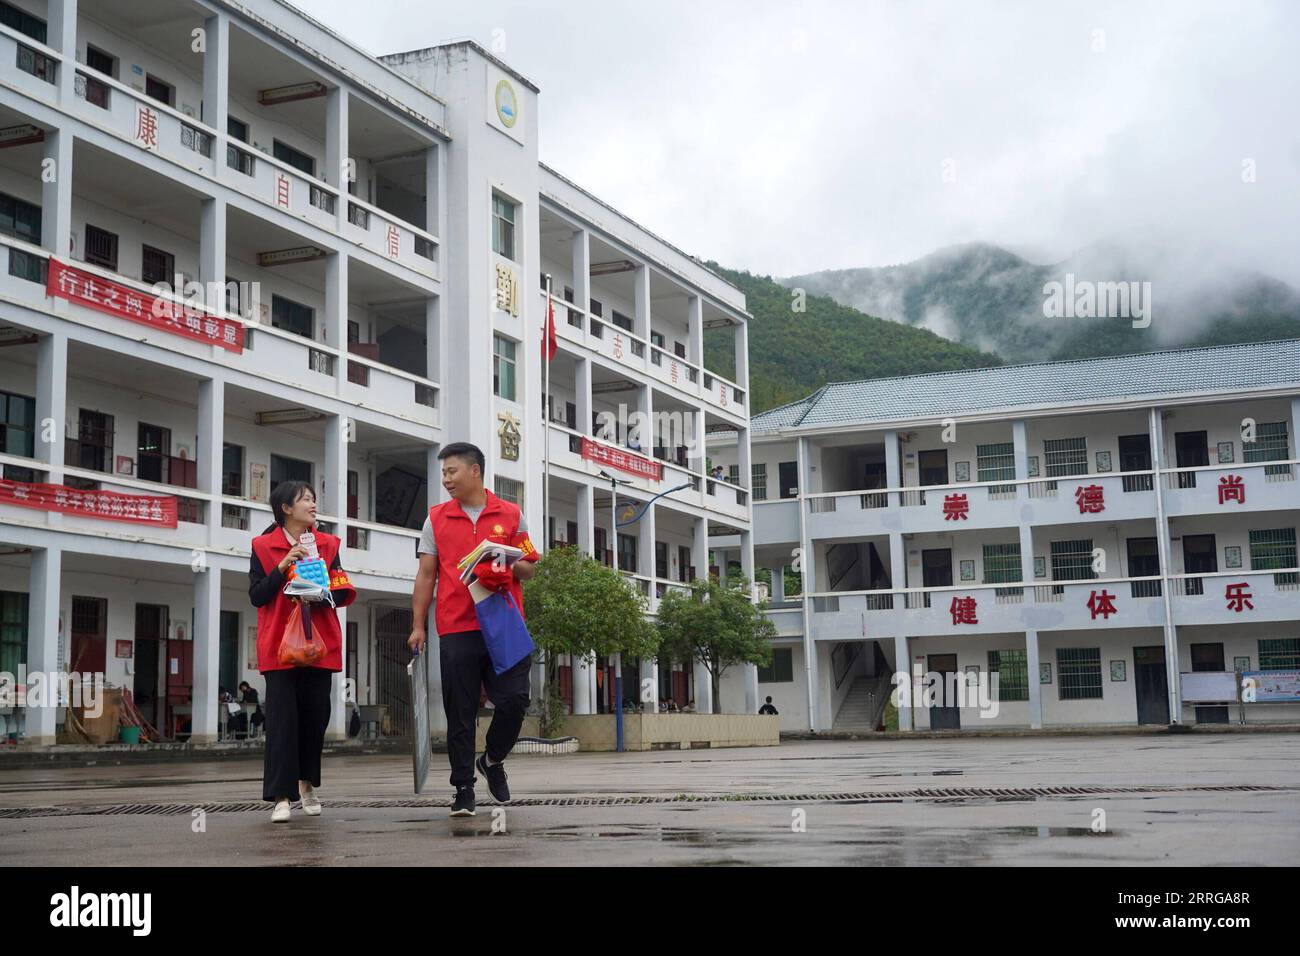 220515 -- JI AN, May 15, 2022 -- Zhao Longjuan L and Wang Zhi are on their way to disabled students homes to deliver classes at Wan an County, east China s Jiangxi Province, May 13, 2022. Nearly 200 teachers have been providing home delivery teaching for 83 severely disabled students in the county for nearly three years.  CHINA-JIANGXI-DISABLED STUDENTS- HOME DELIVERY TEACHING CN WanxXiang PUBLICATIONxNOTxINxCHN Stock Photo